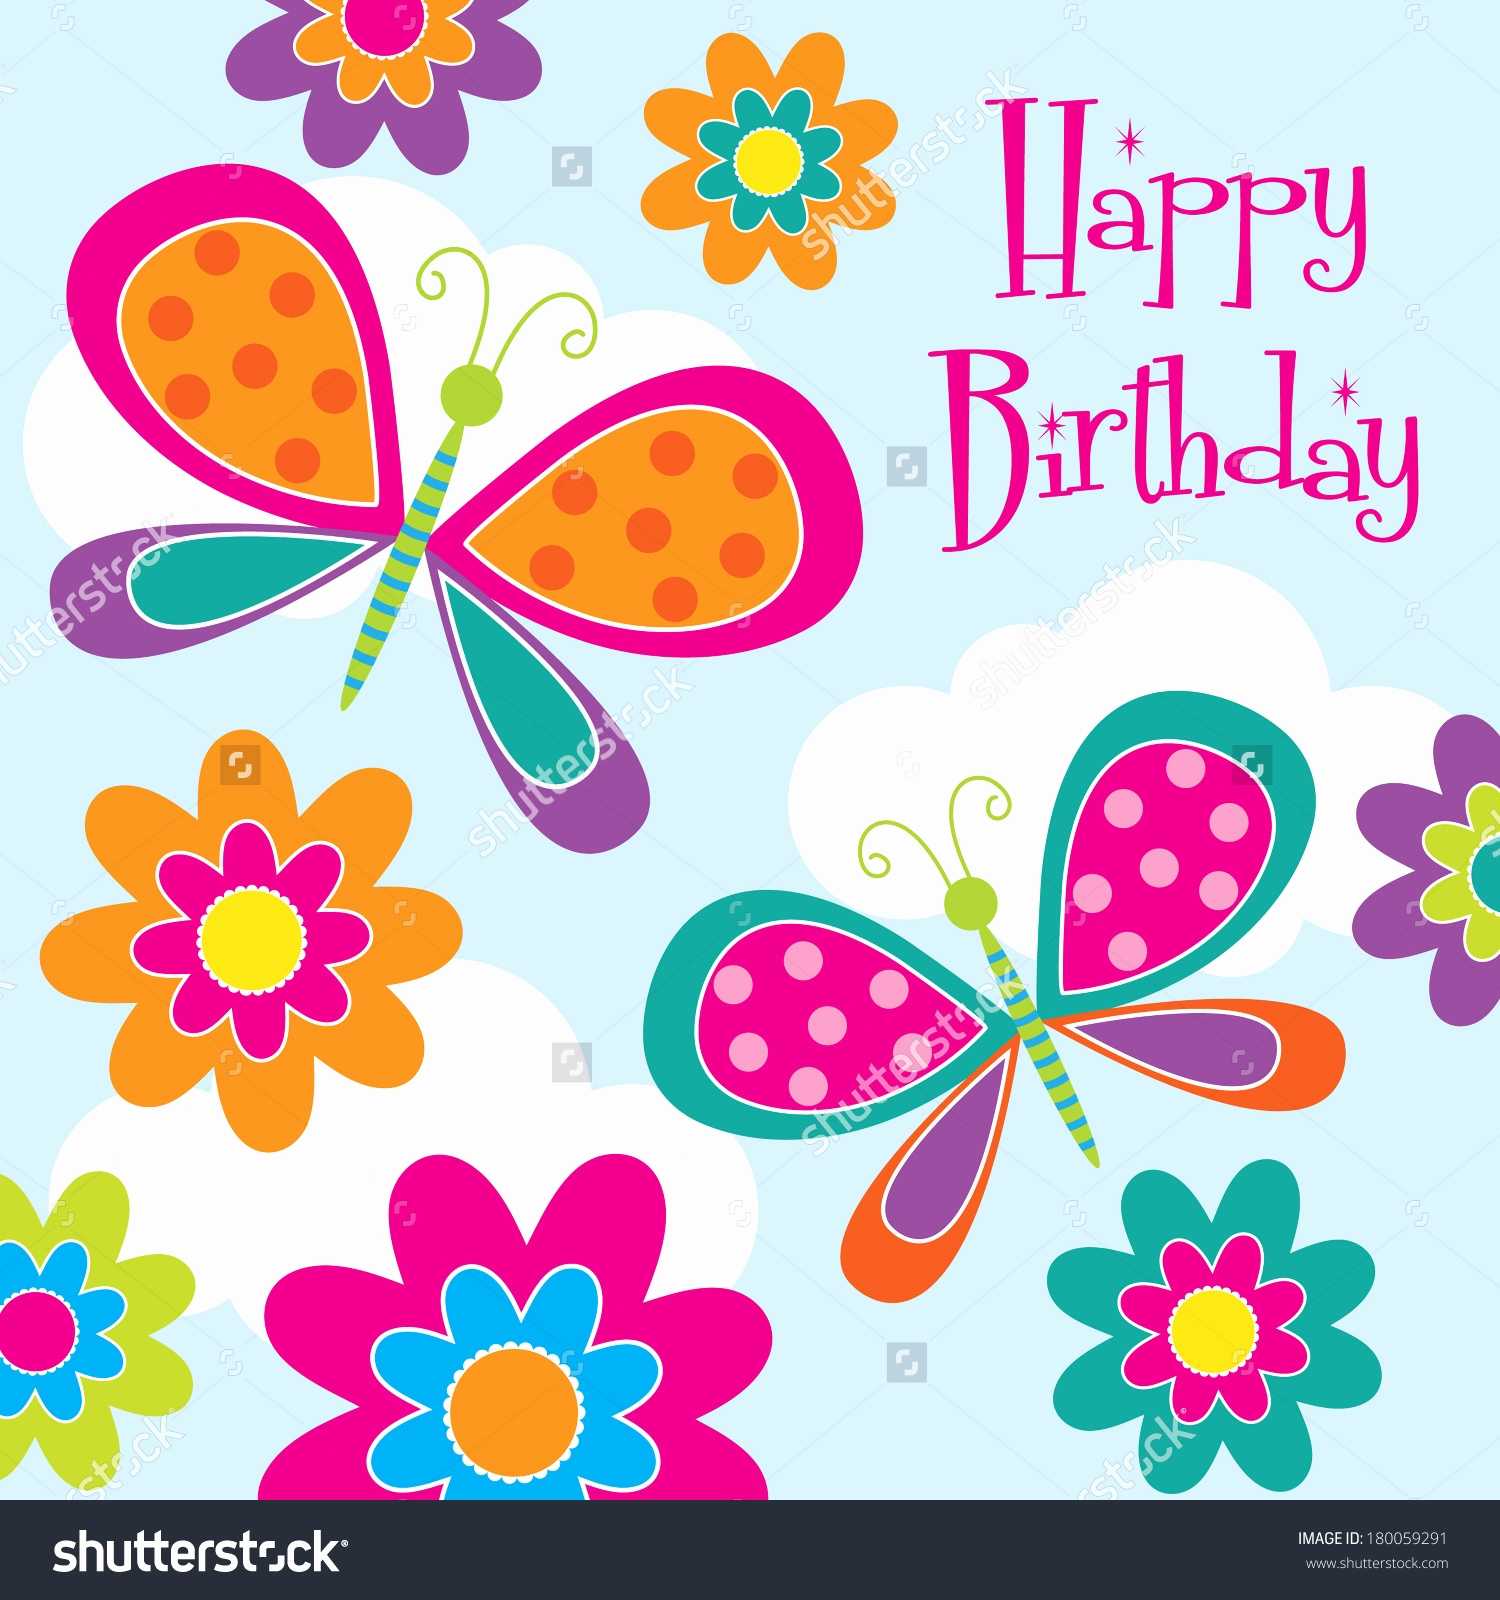 Happy images best of. Birthday clipart butterfly